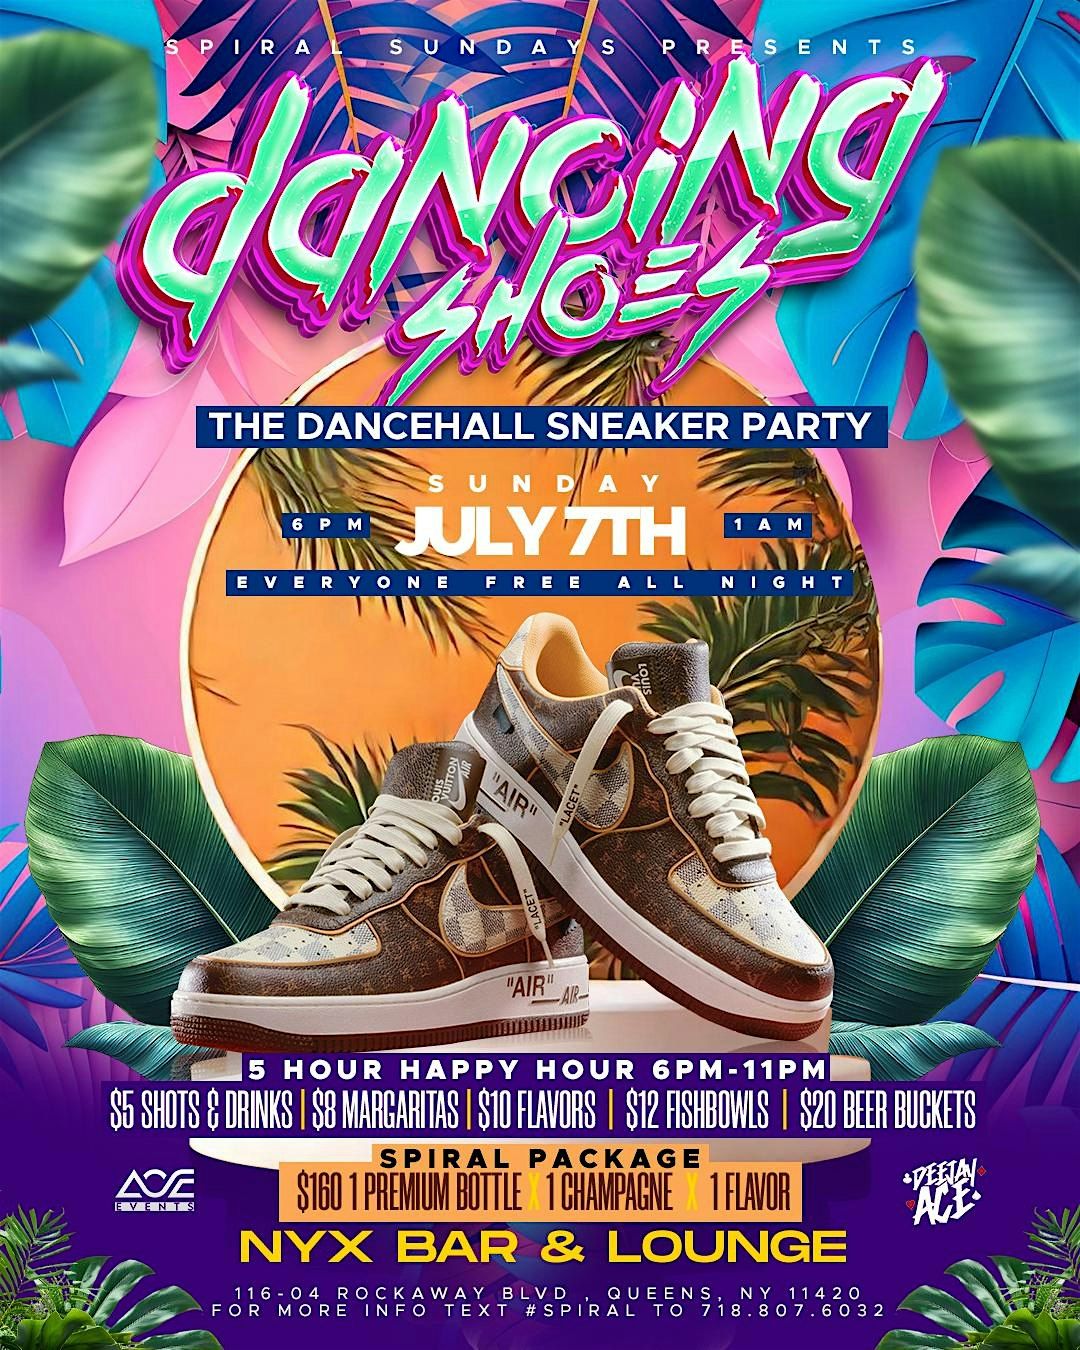 DANCING SHOES - The Dancehall Sneaker Party